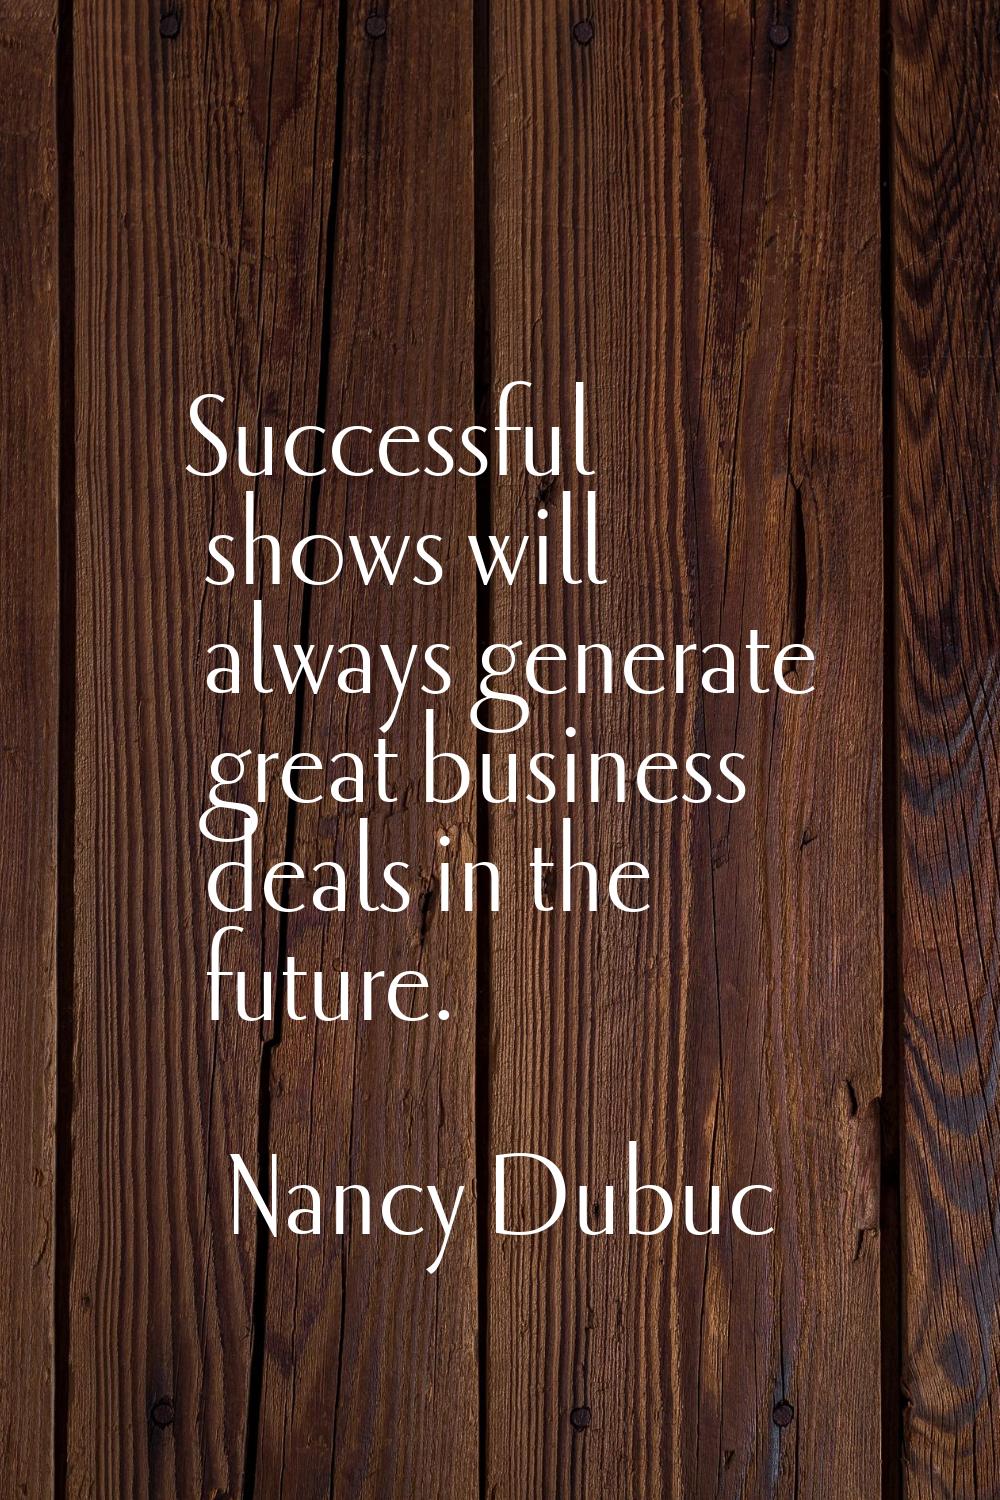 Successful shows will always generate great business deals in the future.